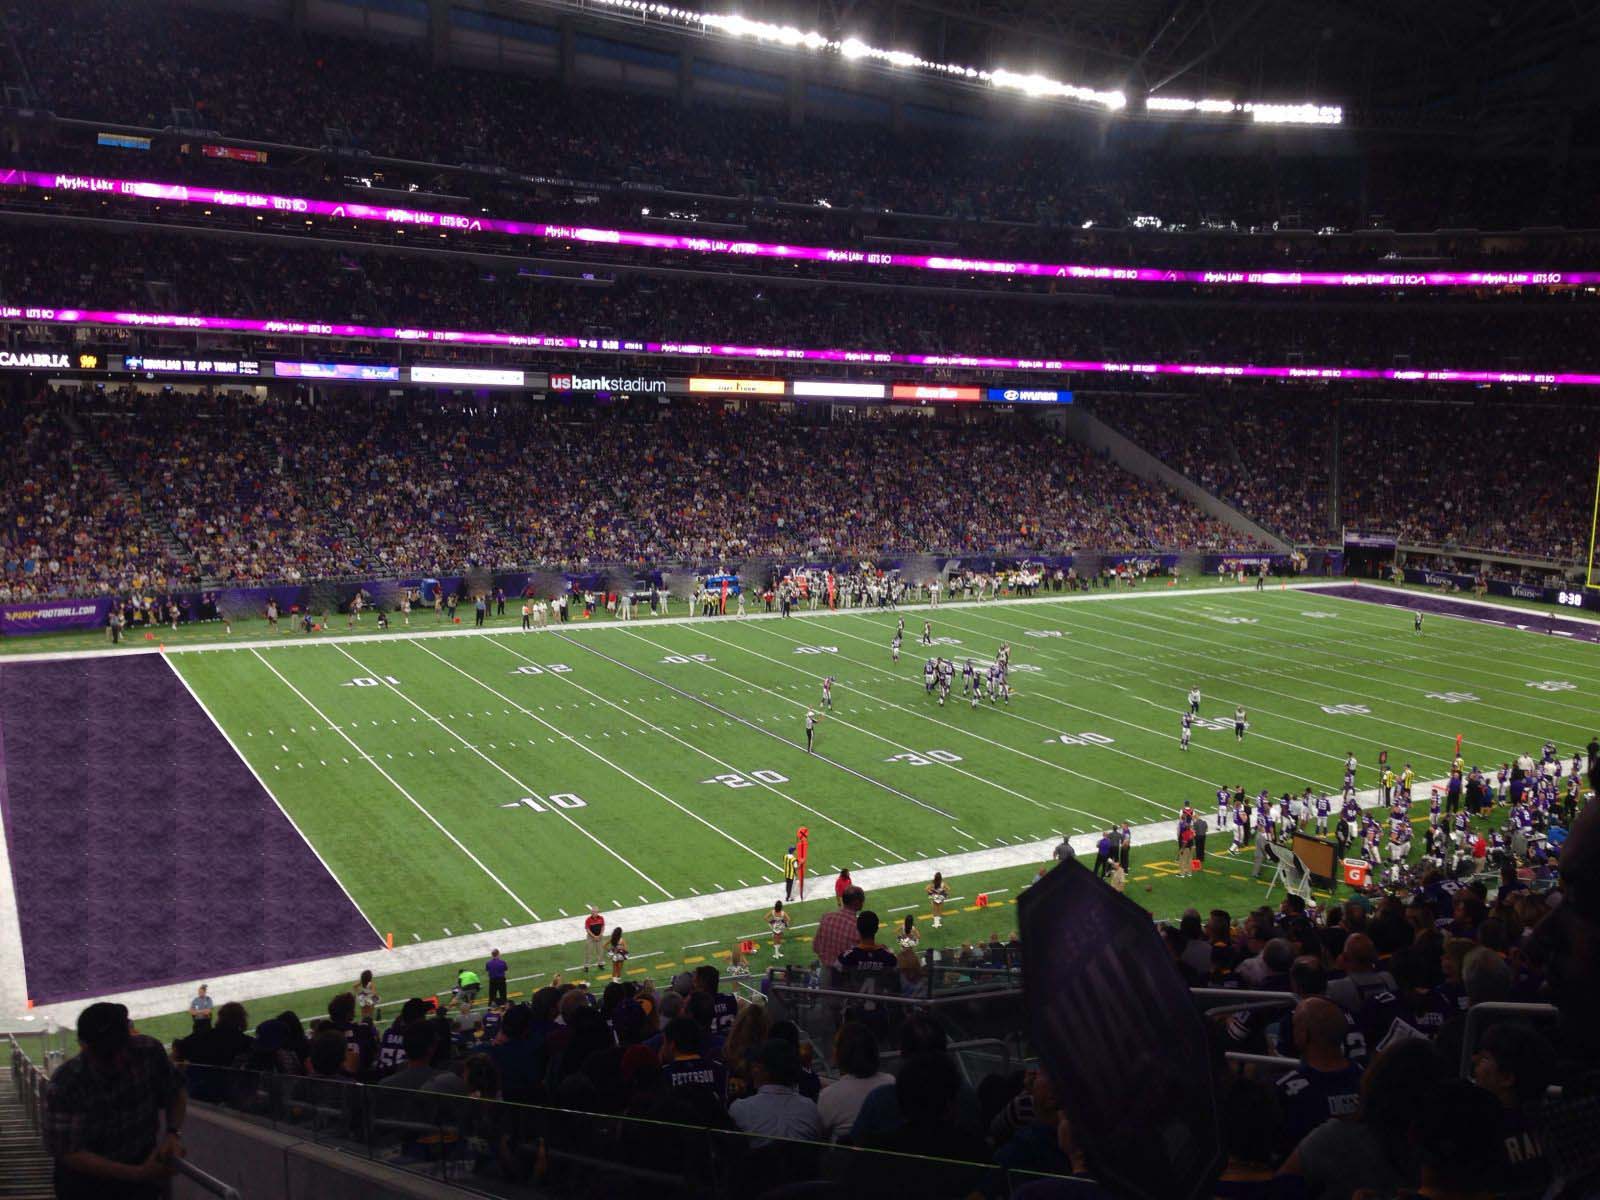 section 136, row 39 seat view  for football - u.s. bank stadium